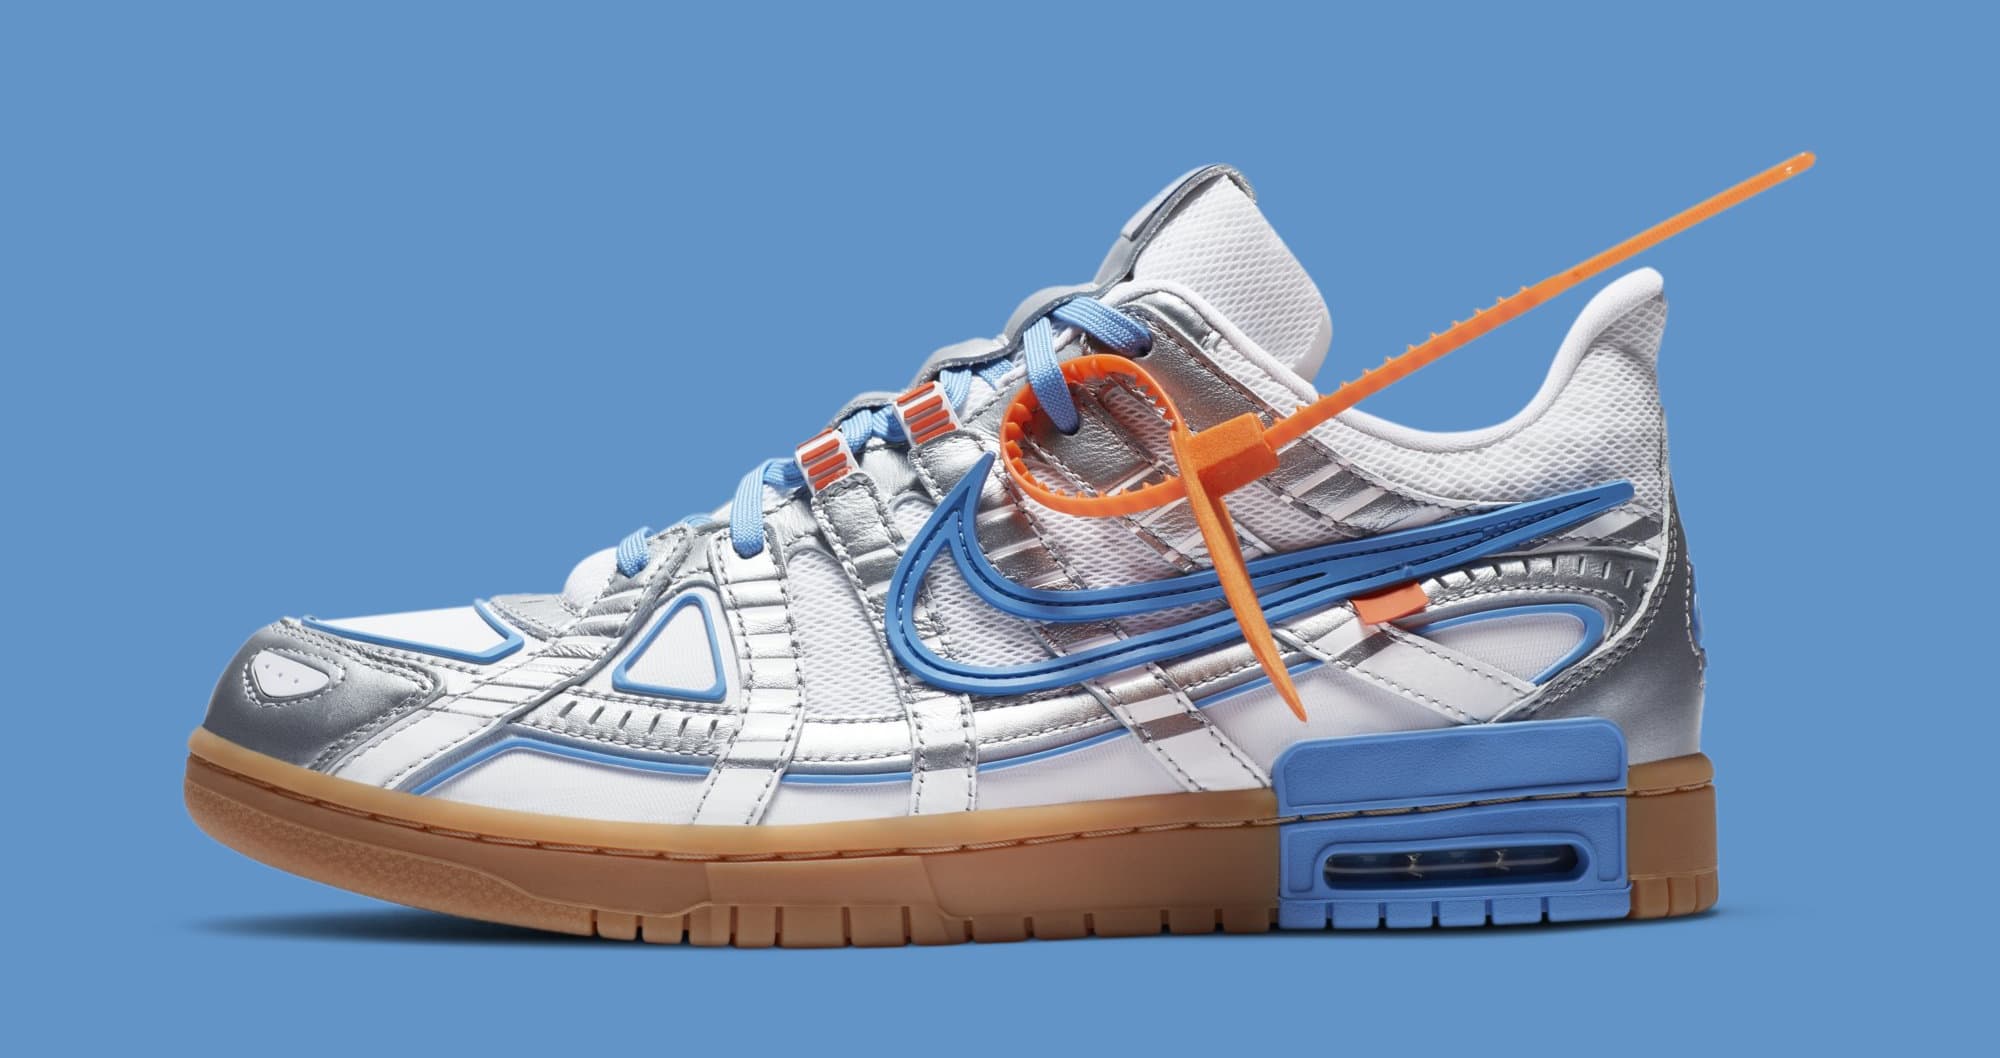 Off-White x Nike Air Rubber Dunk 'University Blue' CU6015-100 Lateral